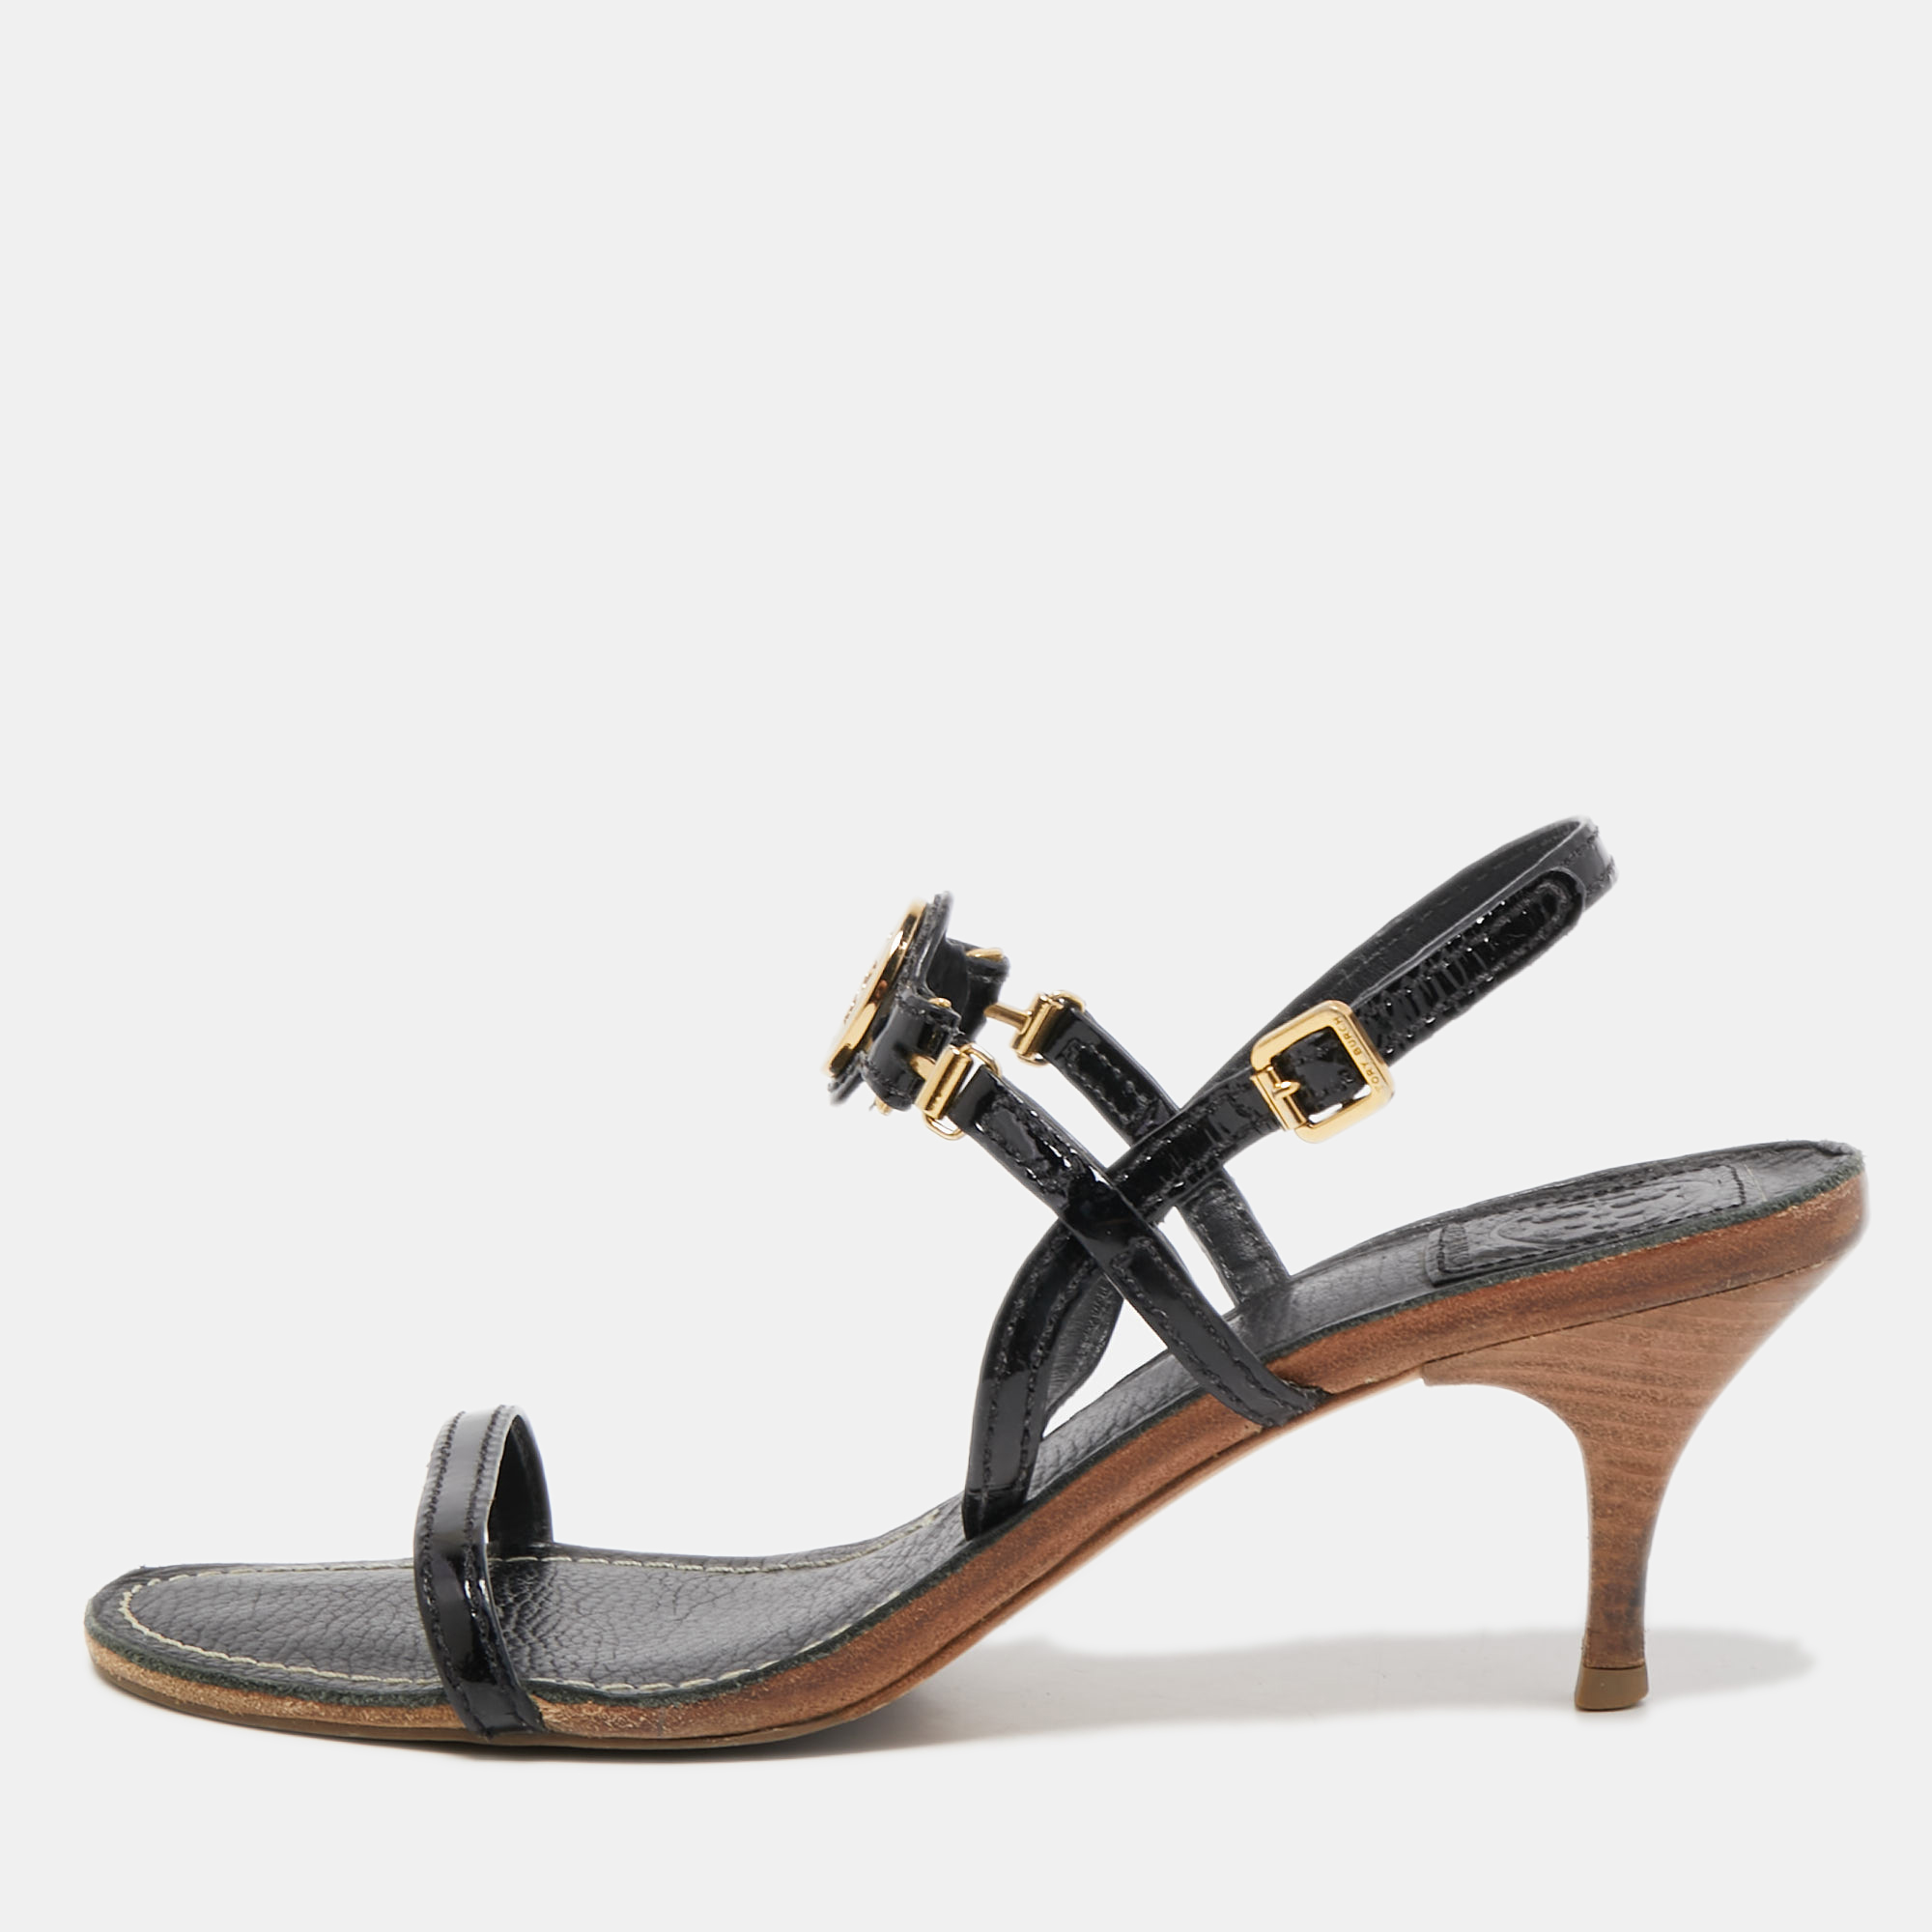 Tory Burch Black Patent And Leather Ankle Strap Sandals Size 39.5